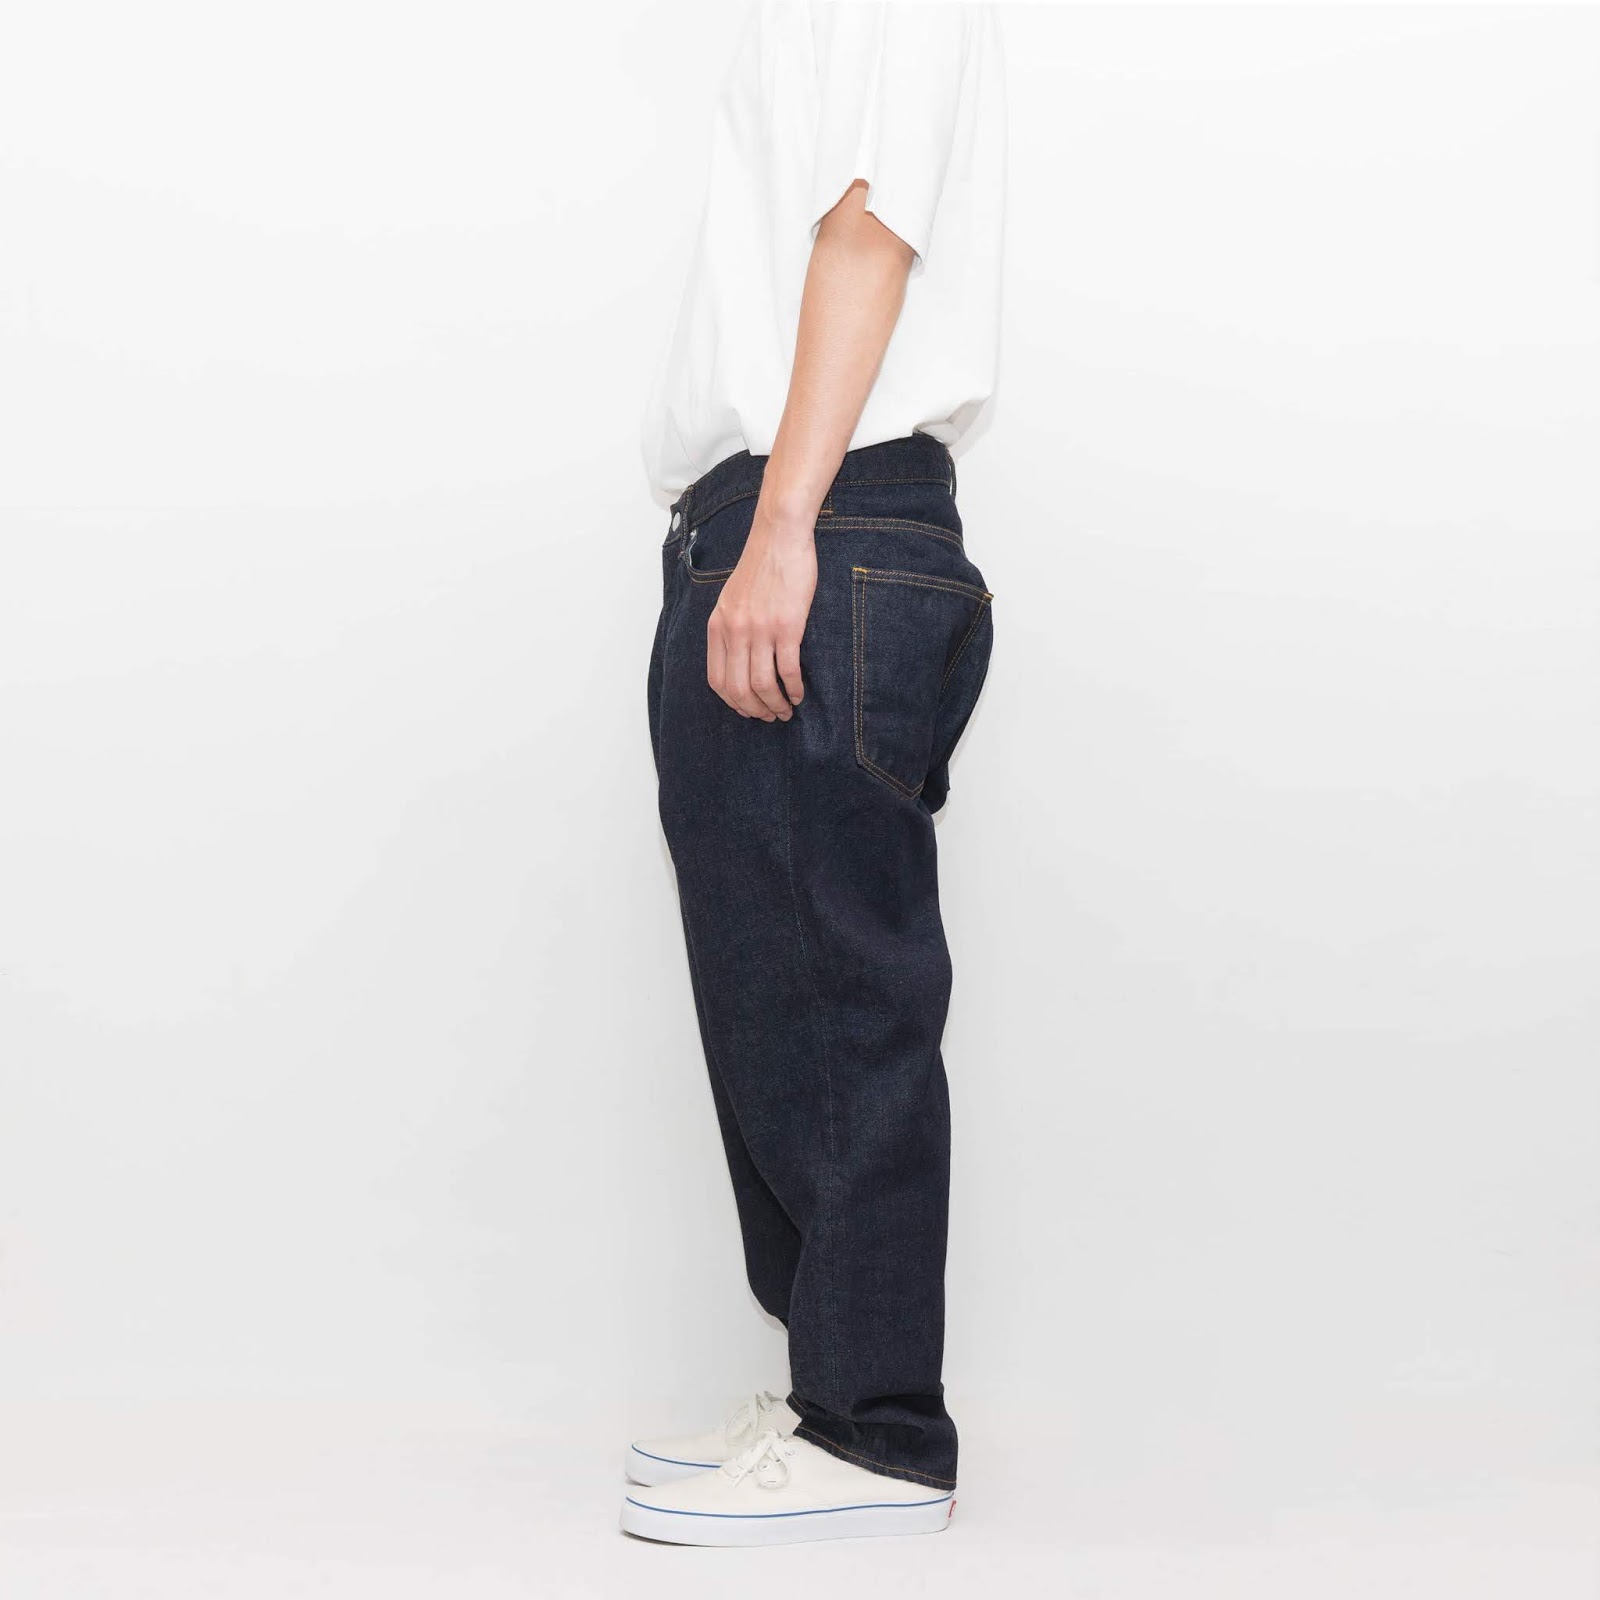 CUP AND CONE : Custom Fit Denim Pants